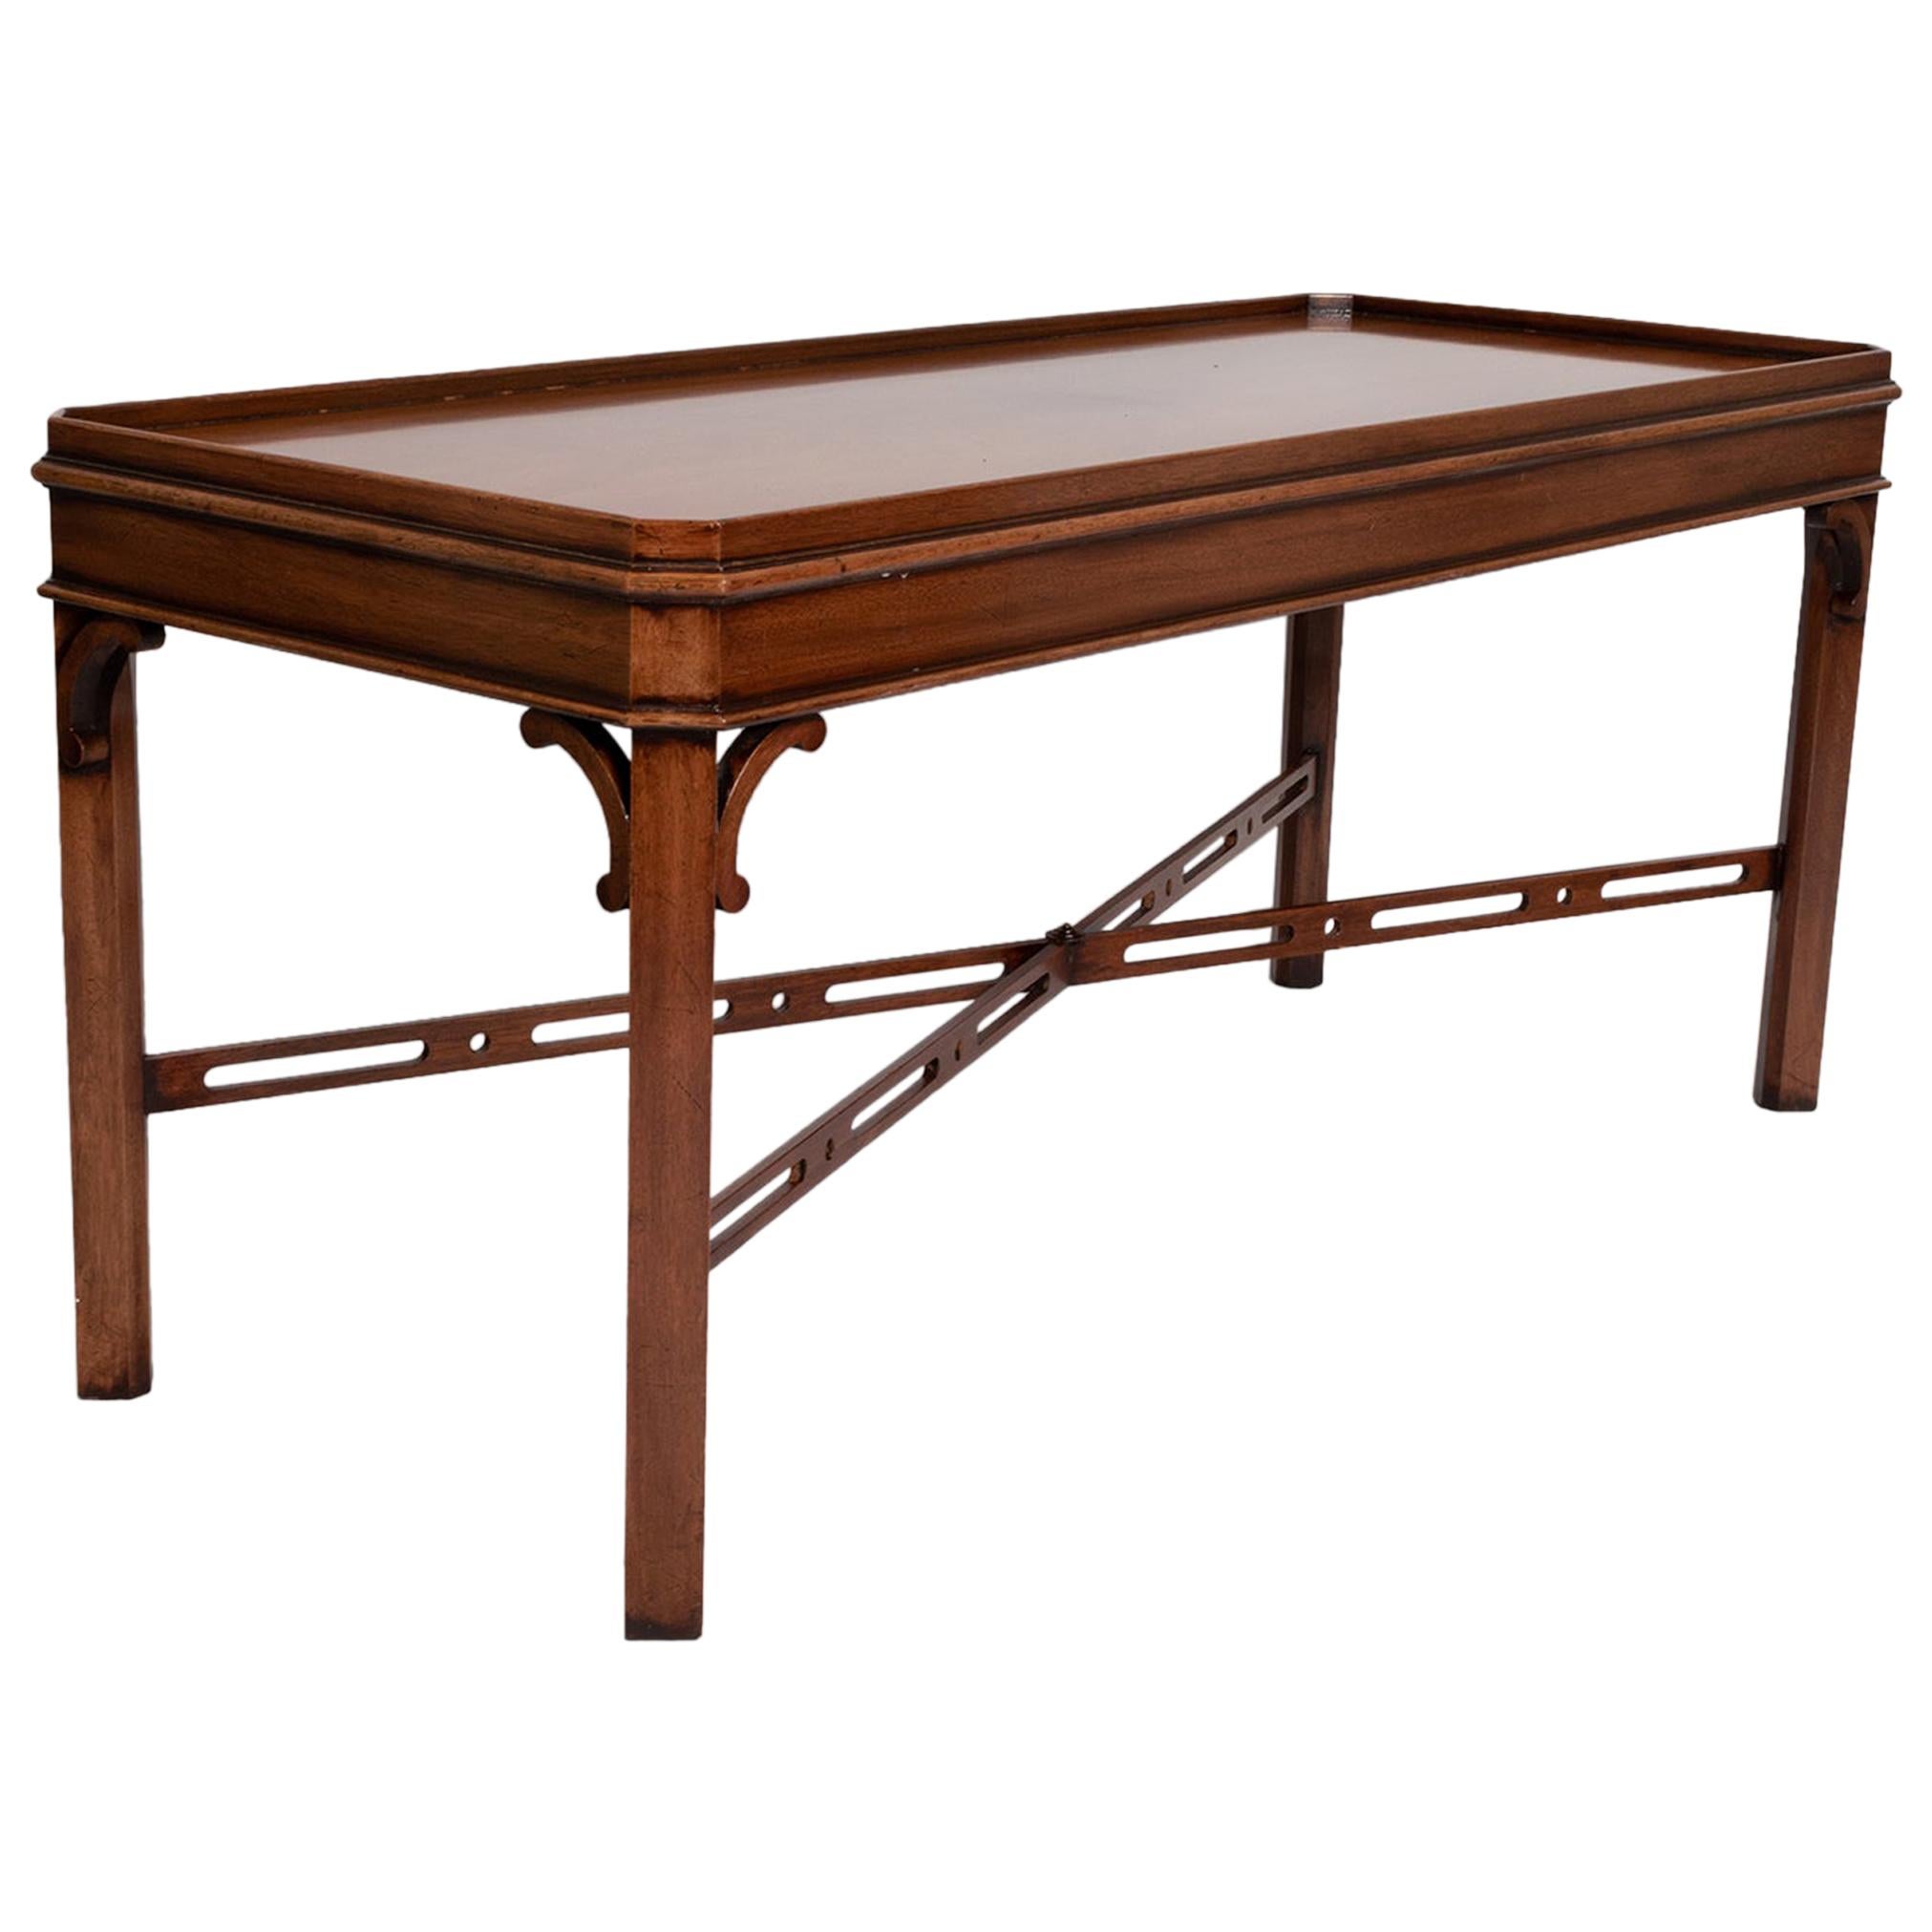 English Georgian Chippendale Style Mahogany Coffee Table by Brights of Nettlebed